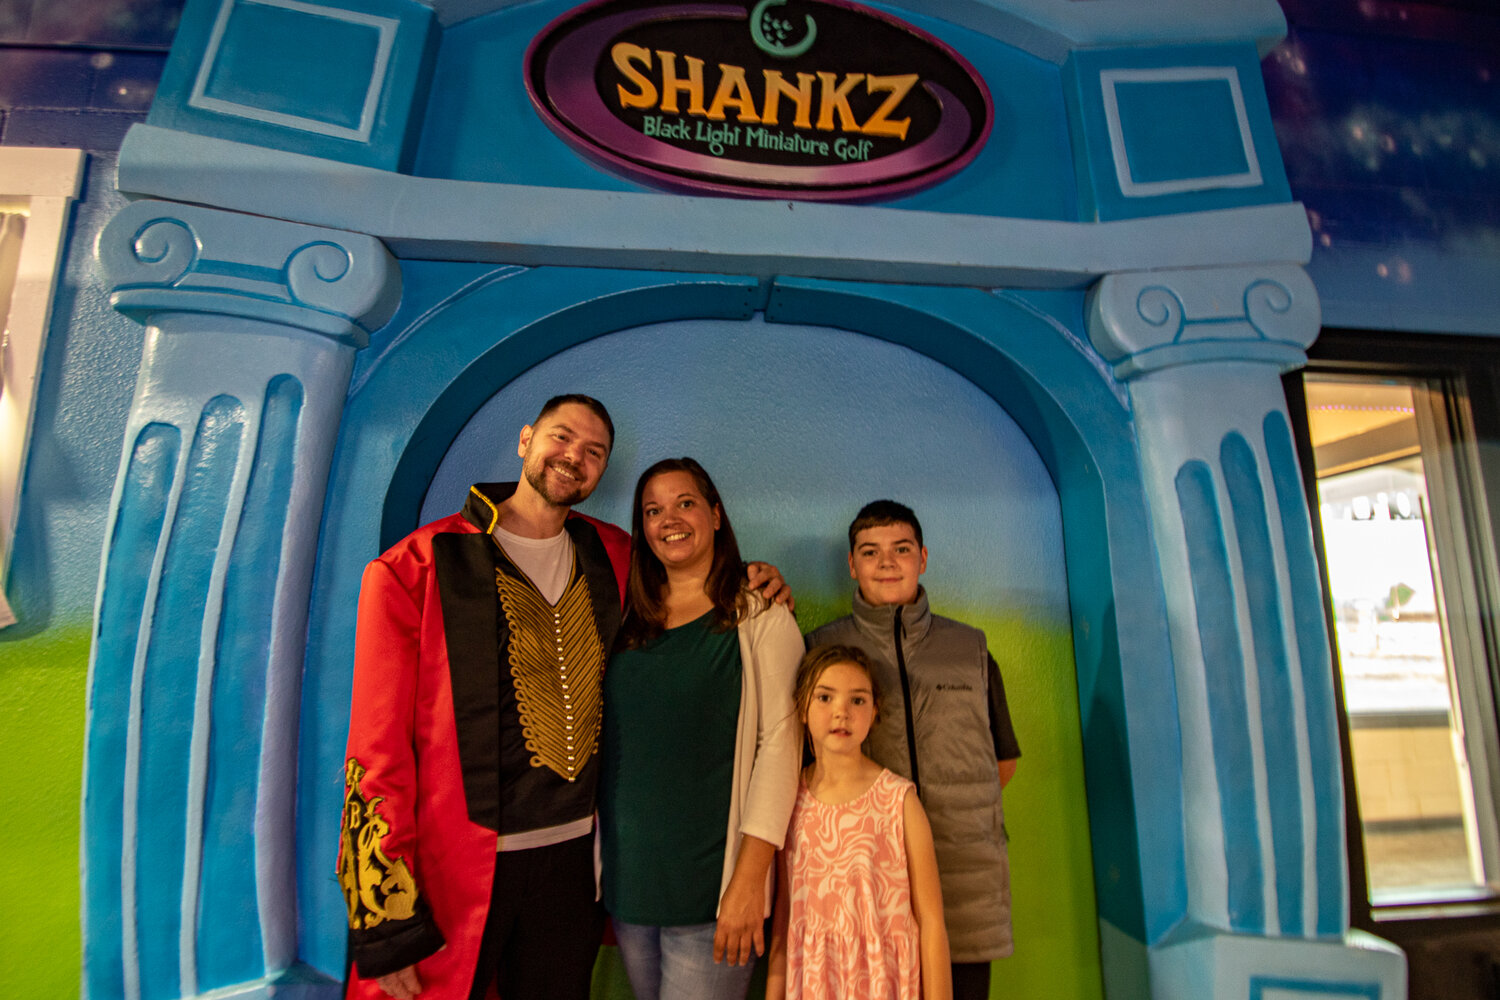 Guy Steele, who performs as Mr. Twister, poses with his wife, Tessa, son, Guy Jr., and daughter, Shiloh, at their newly reopened family business, Shankz Black Light Miniature Golf, on Thursday, Aug. 31.